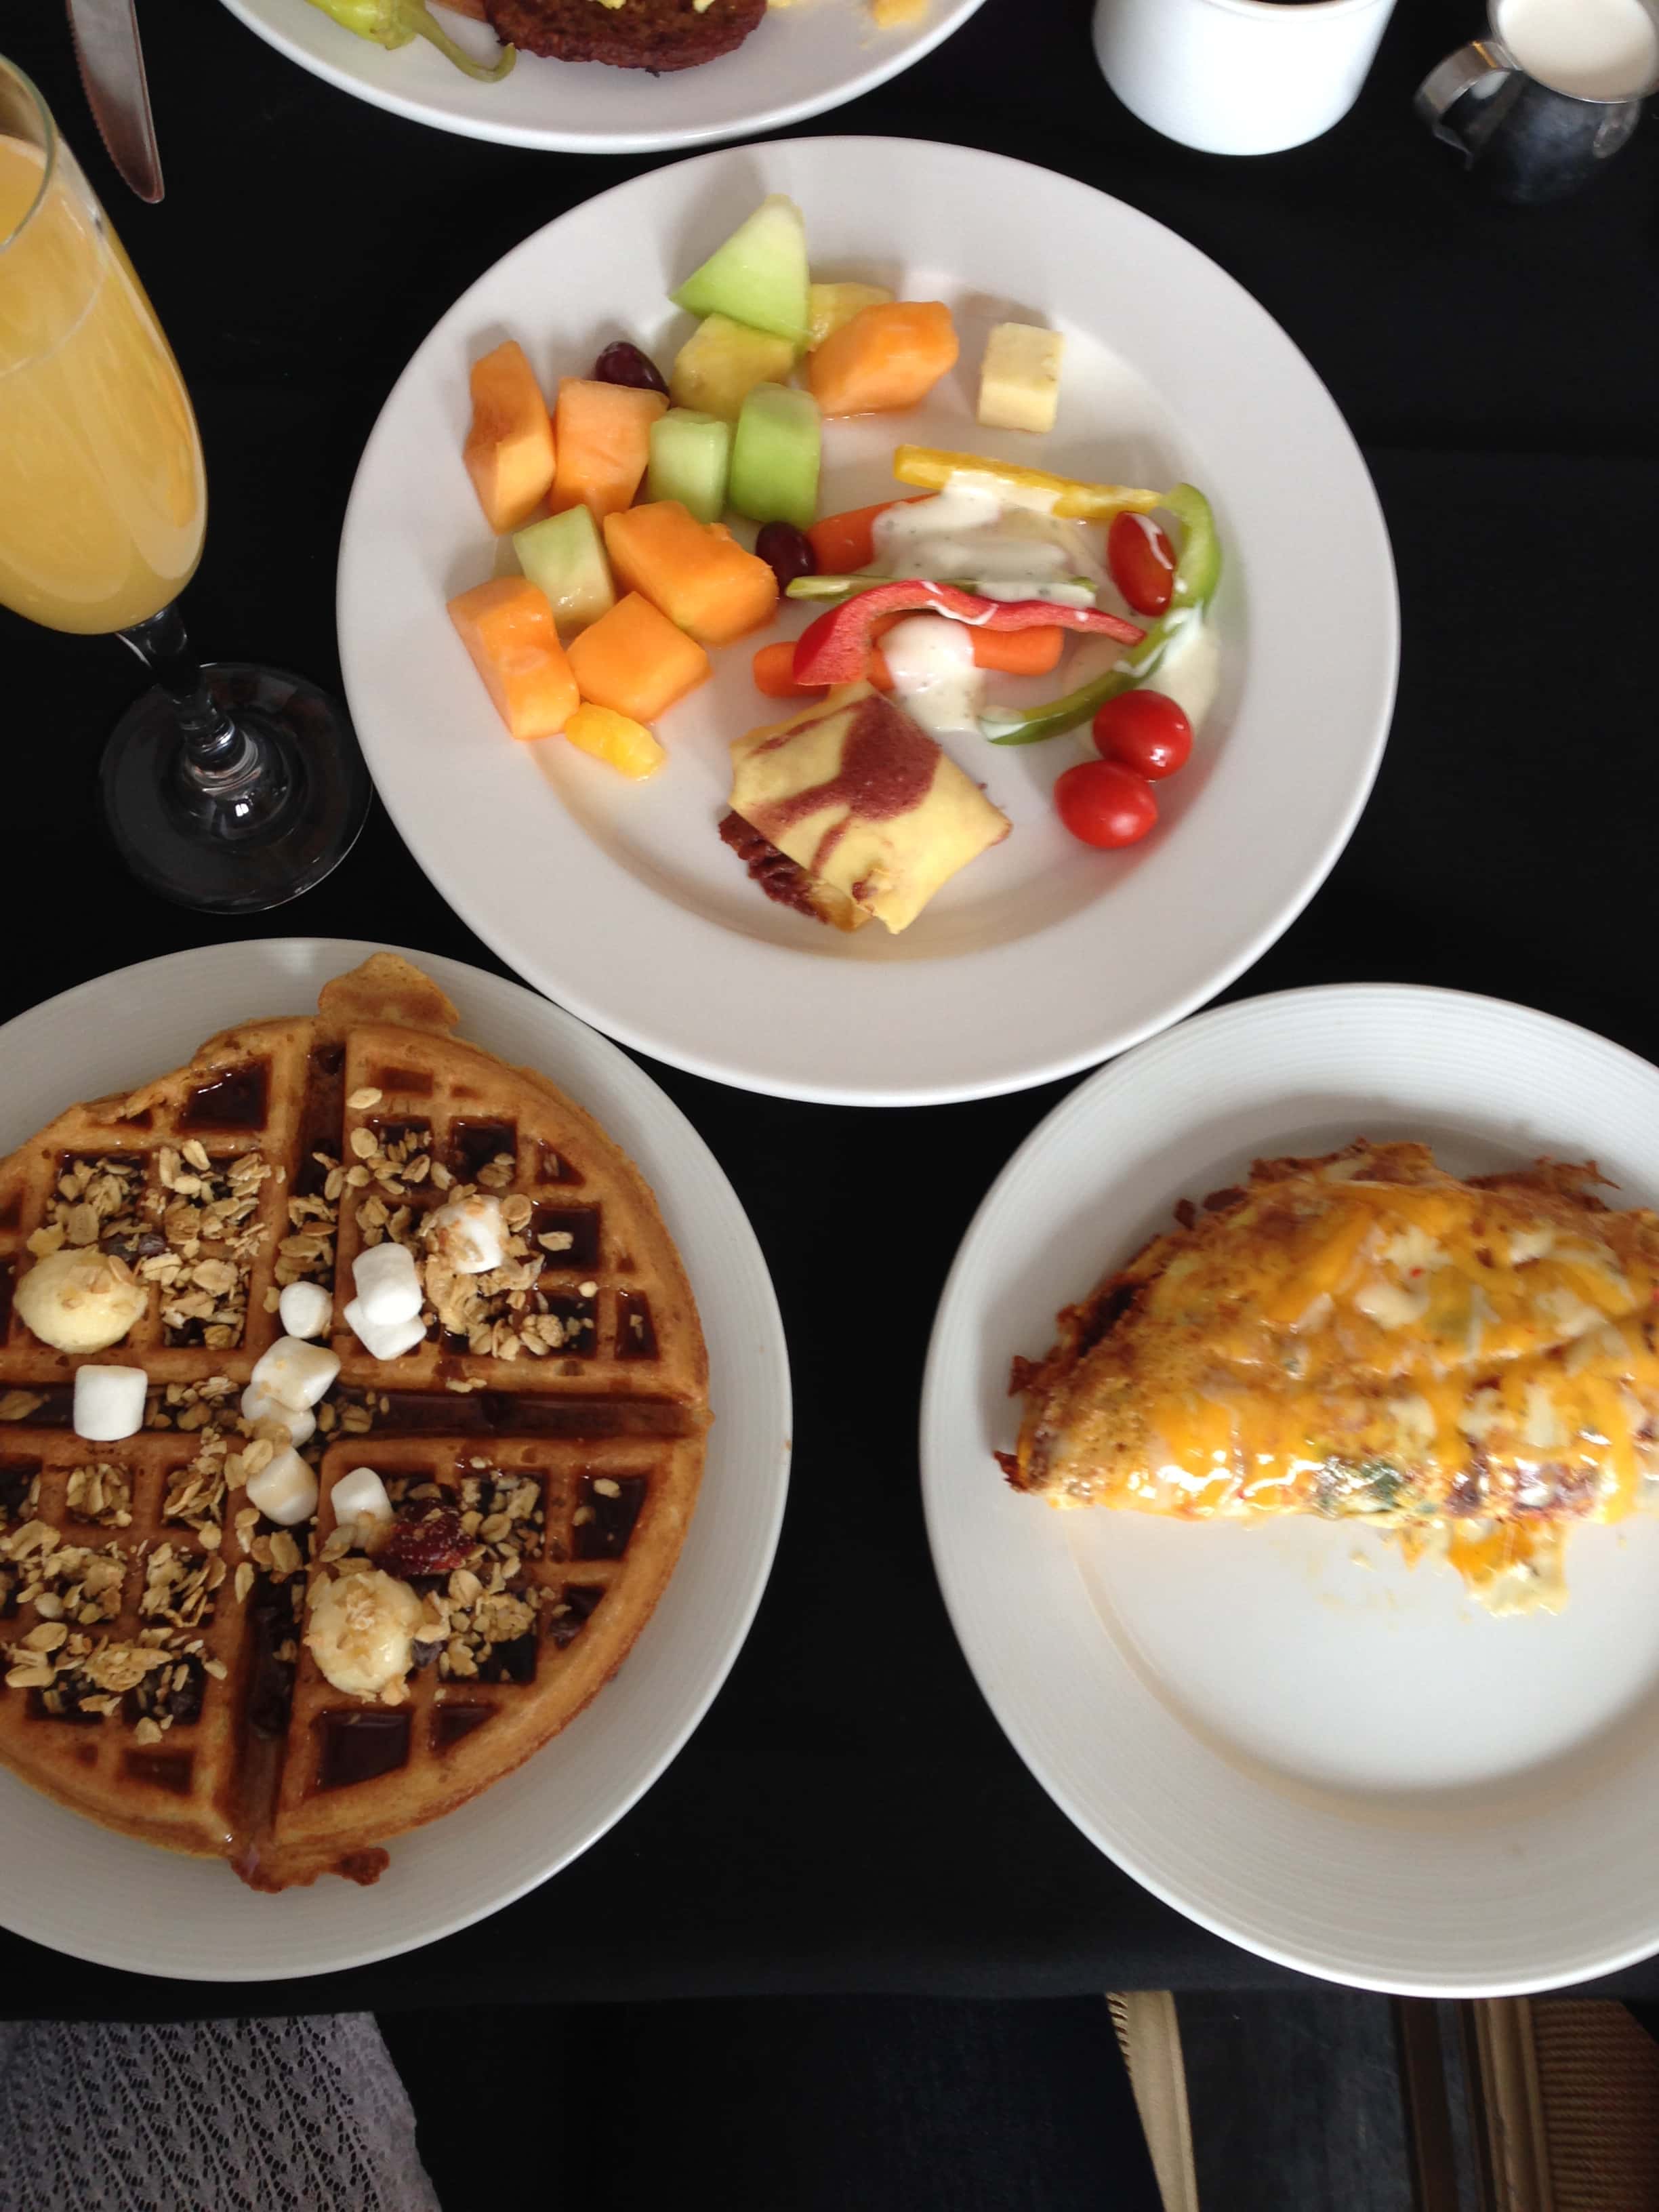 Brunch plates from The Vertex, Rapid City, SD.